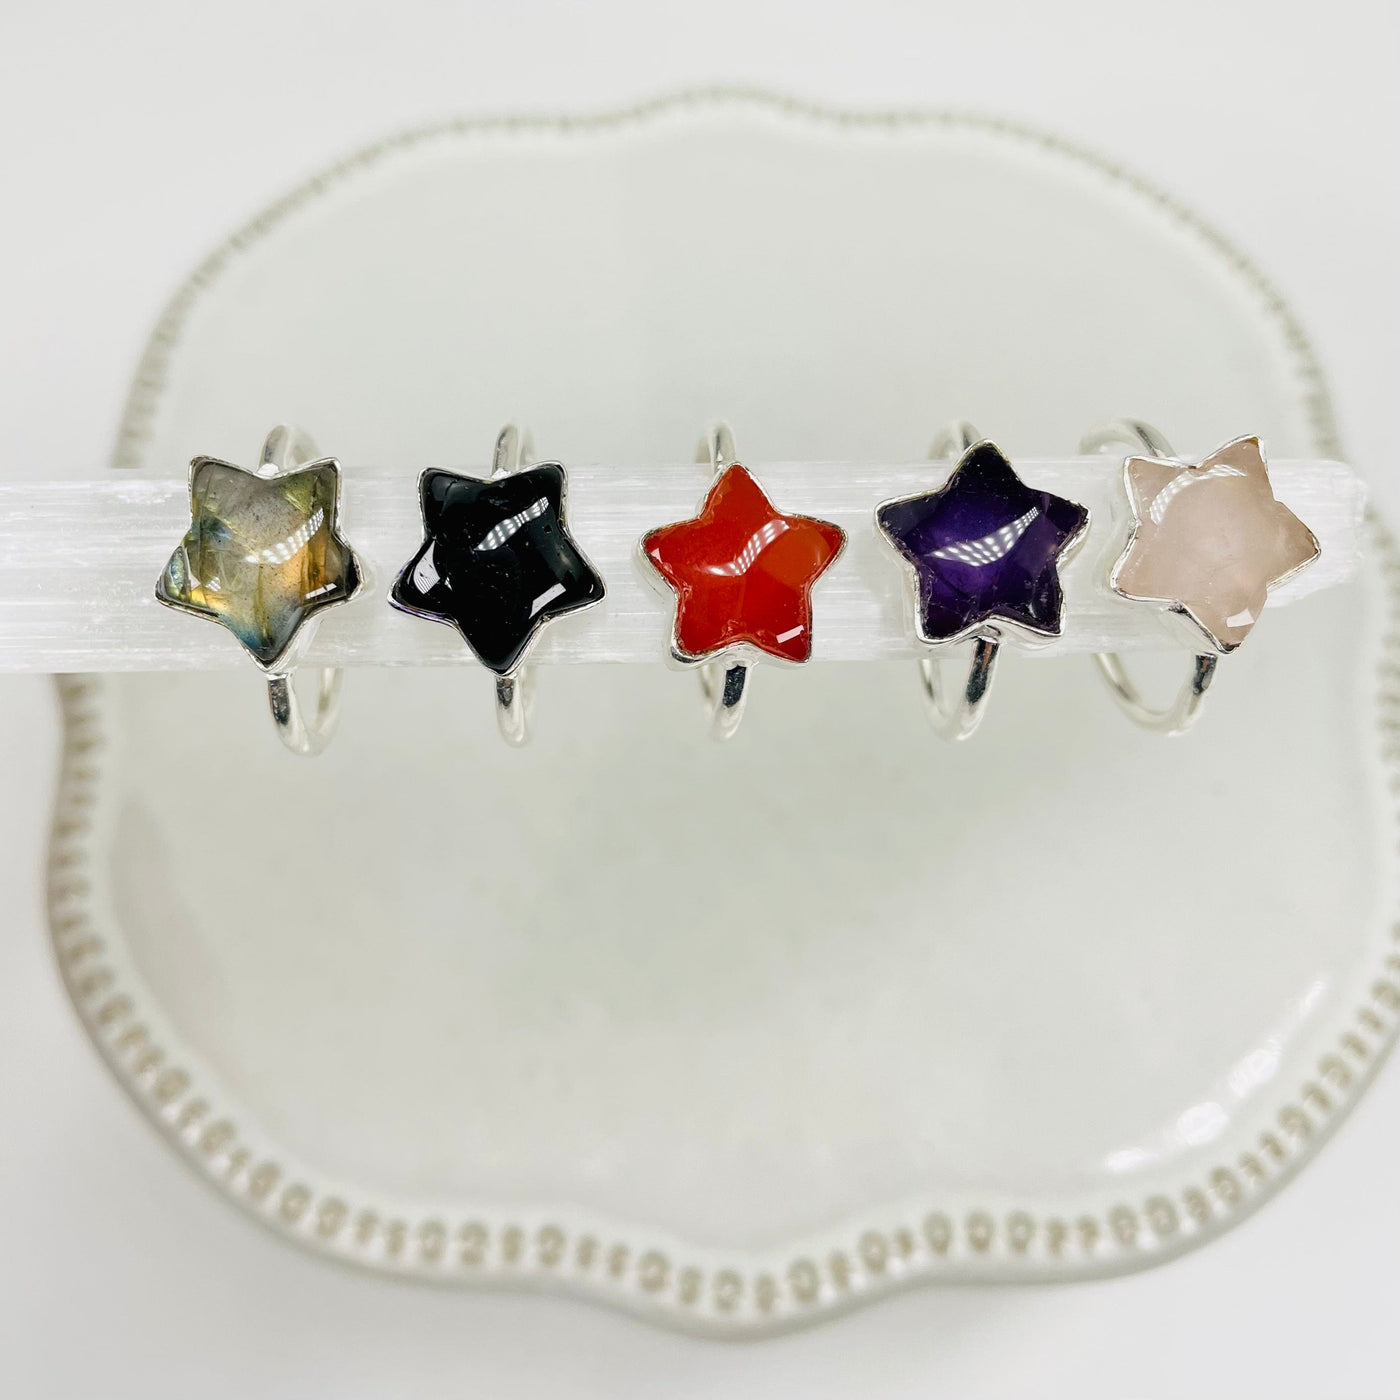 gemstone star rings in silver displayed next to each other to show the differences in the gemstones